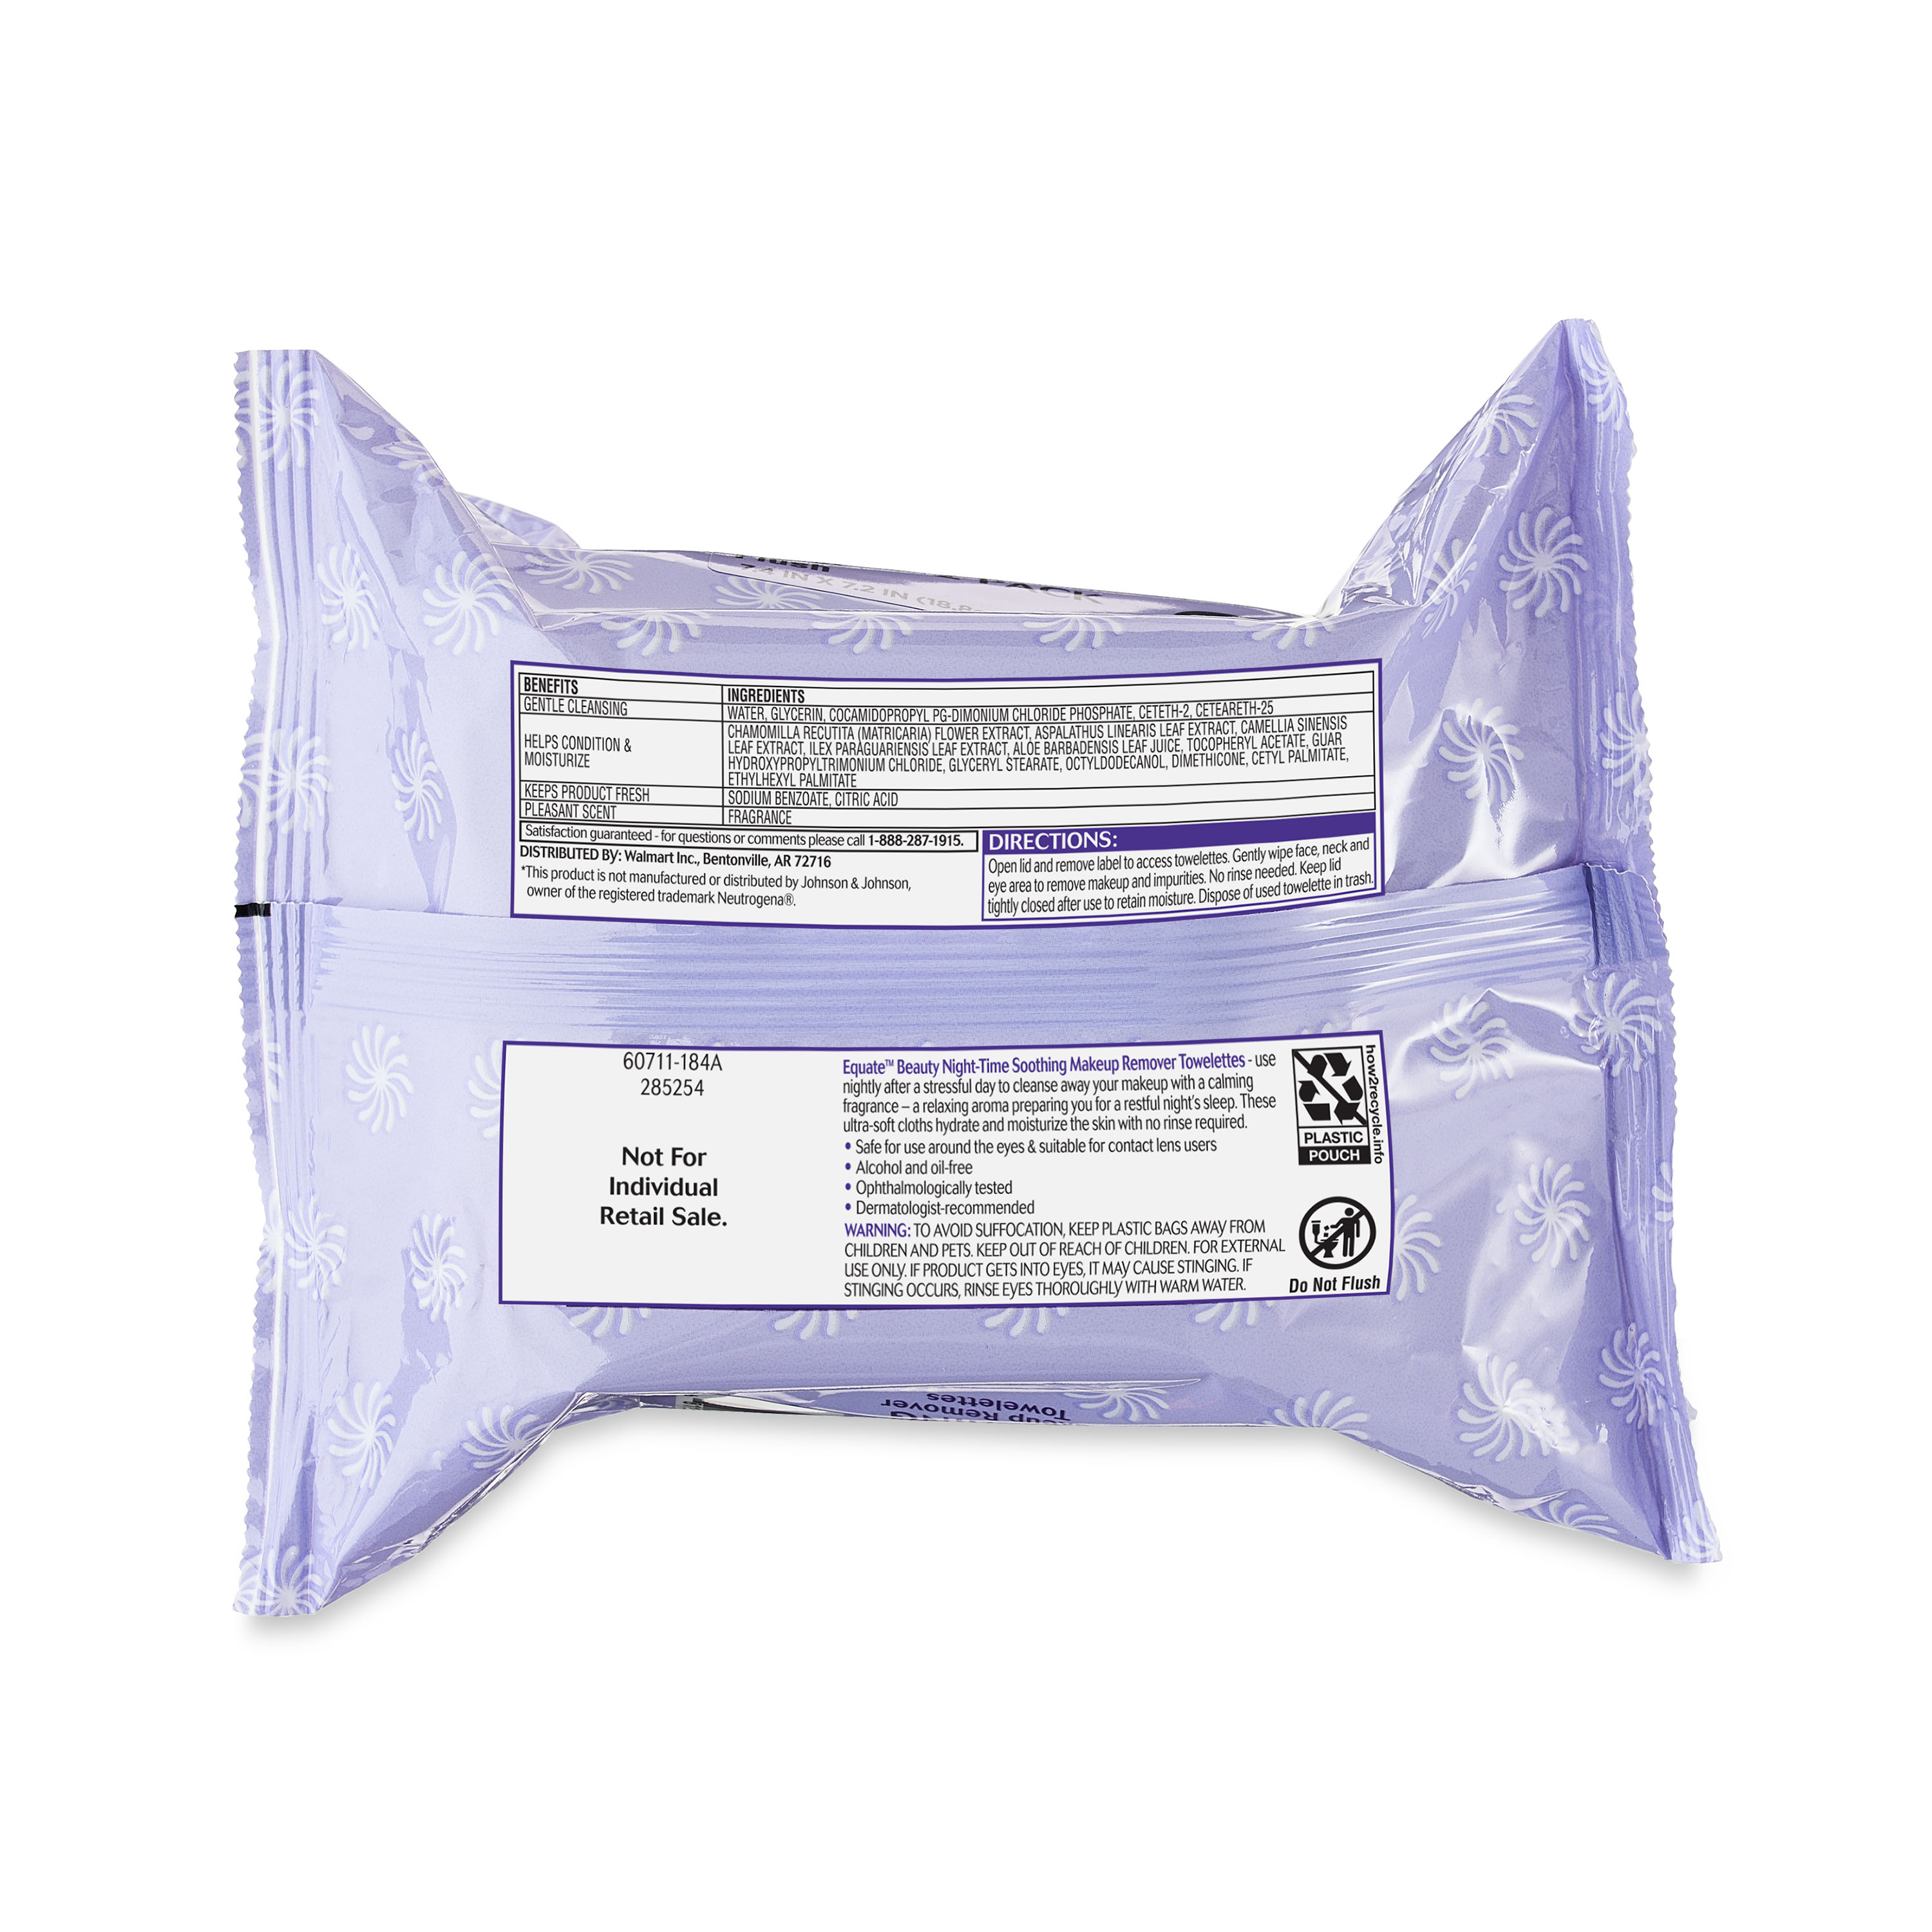 Equate Beauty Night-Time Soothing Makeup Remover Wipes, 40 Count, 2 Pack - image 5 of 7